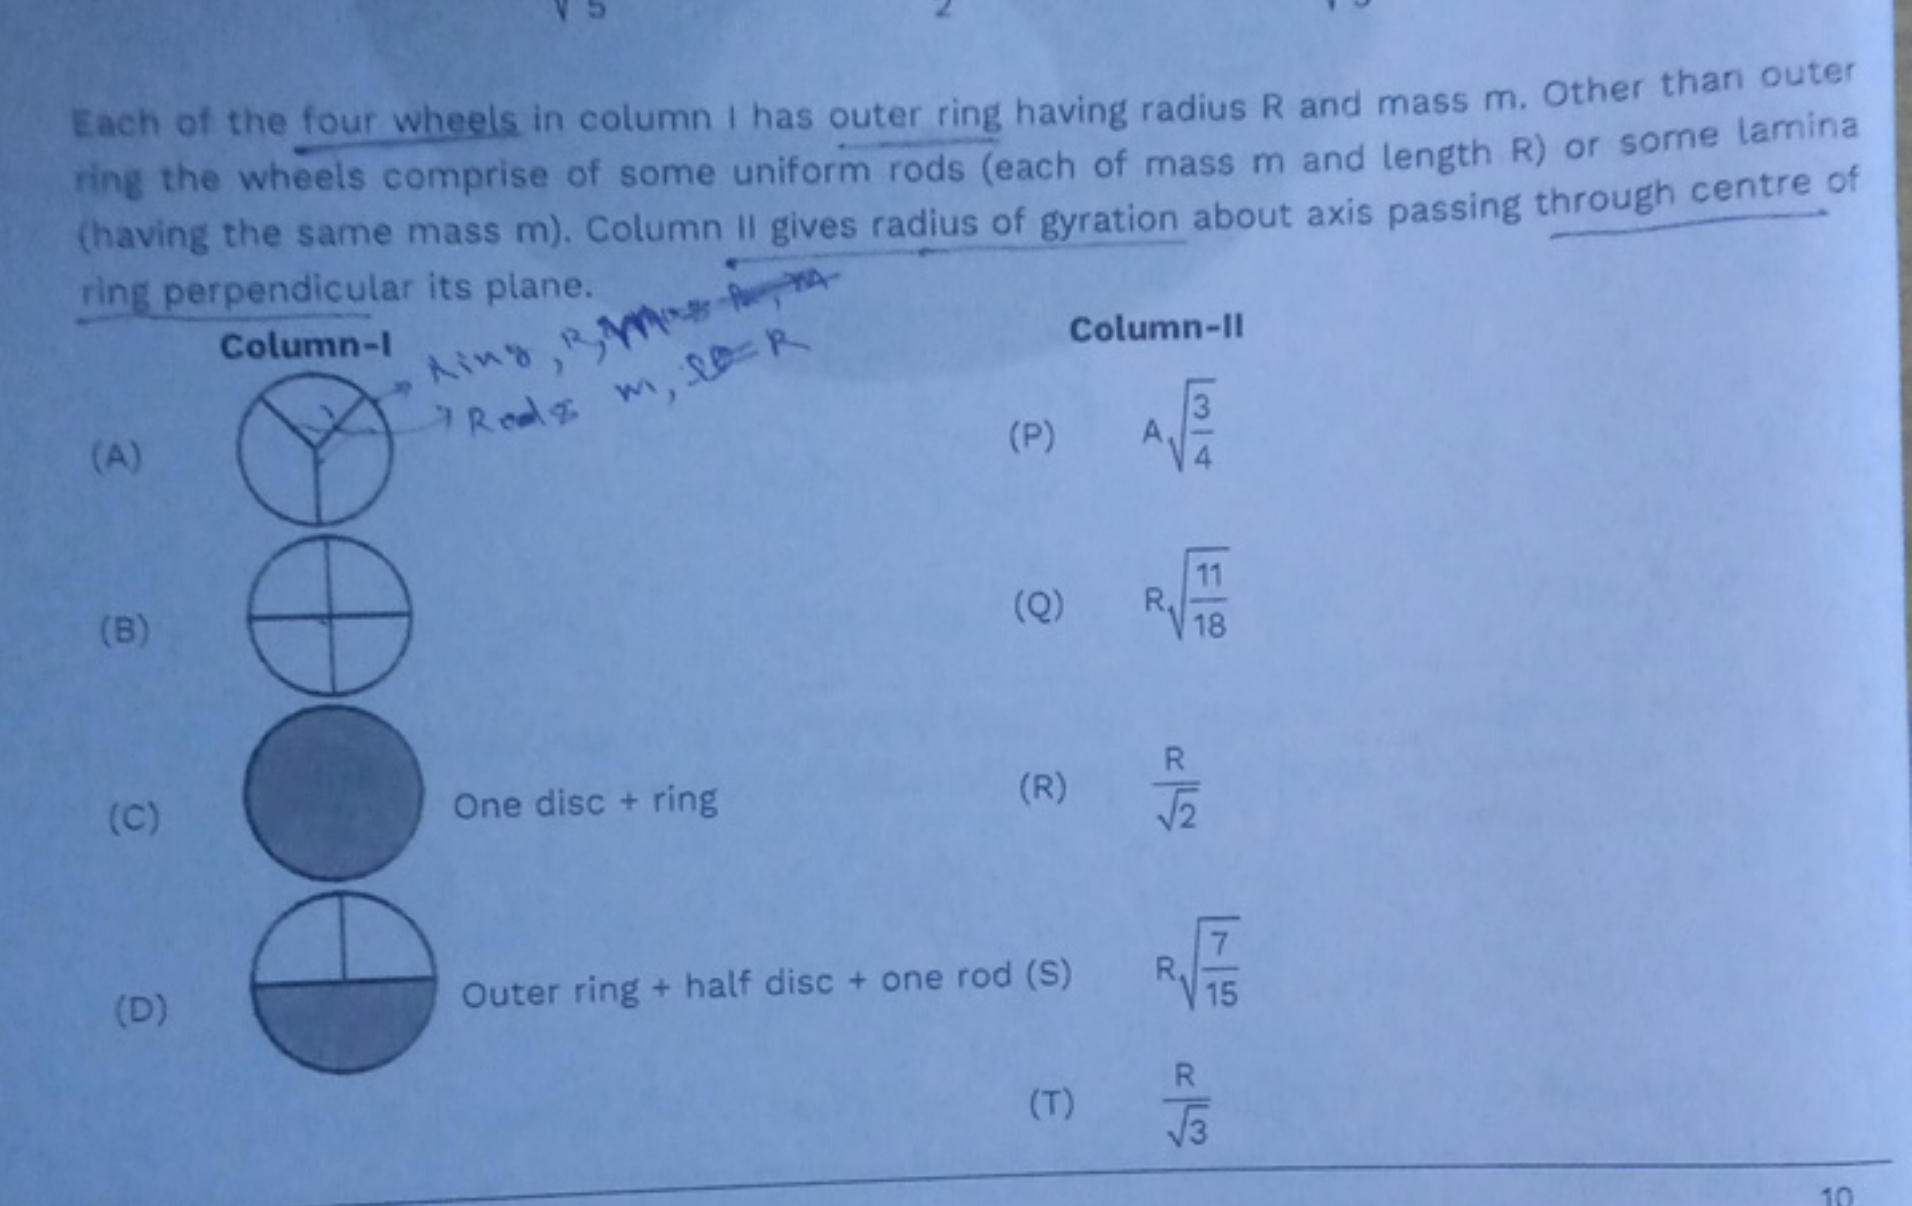 Each of the four wheels in column I has outer ring having radius R and